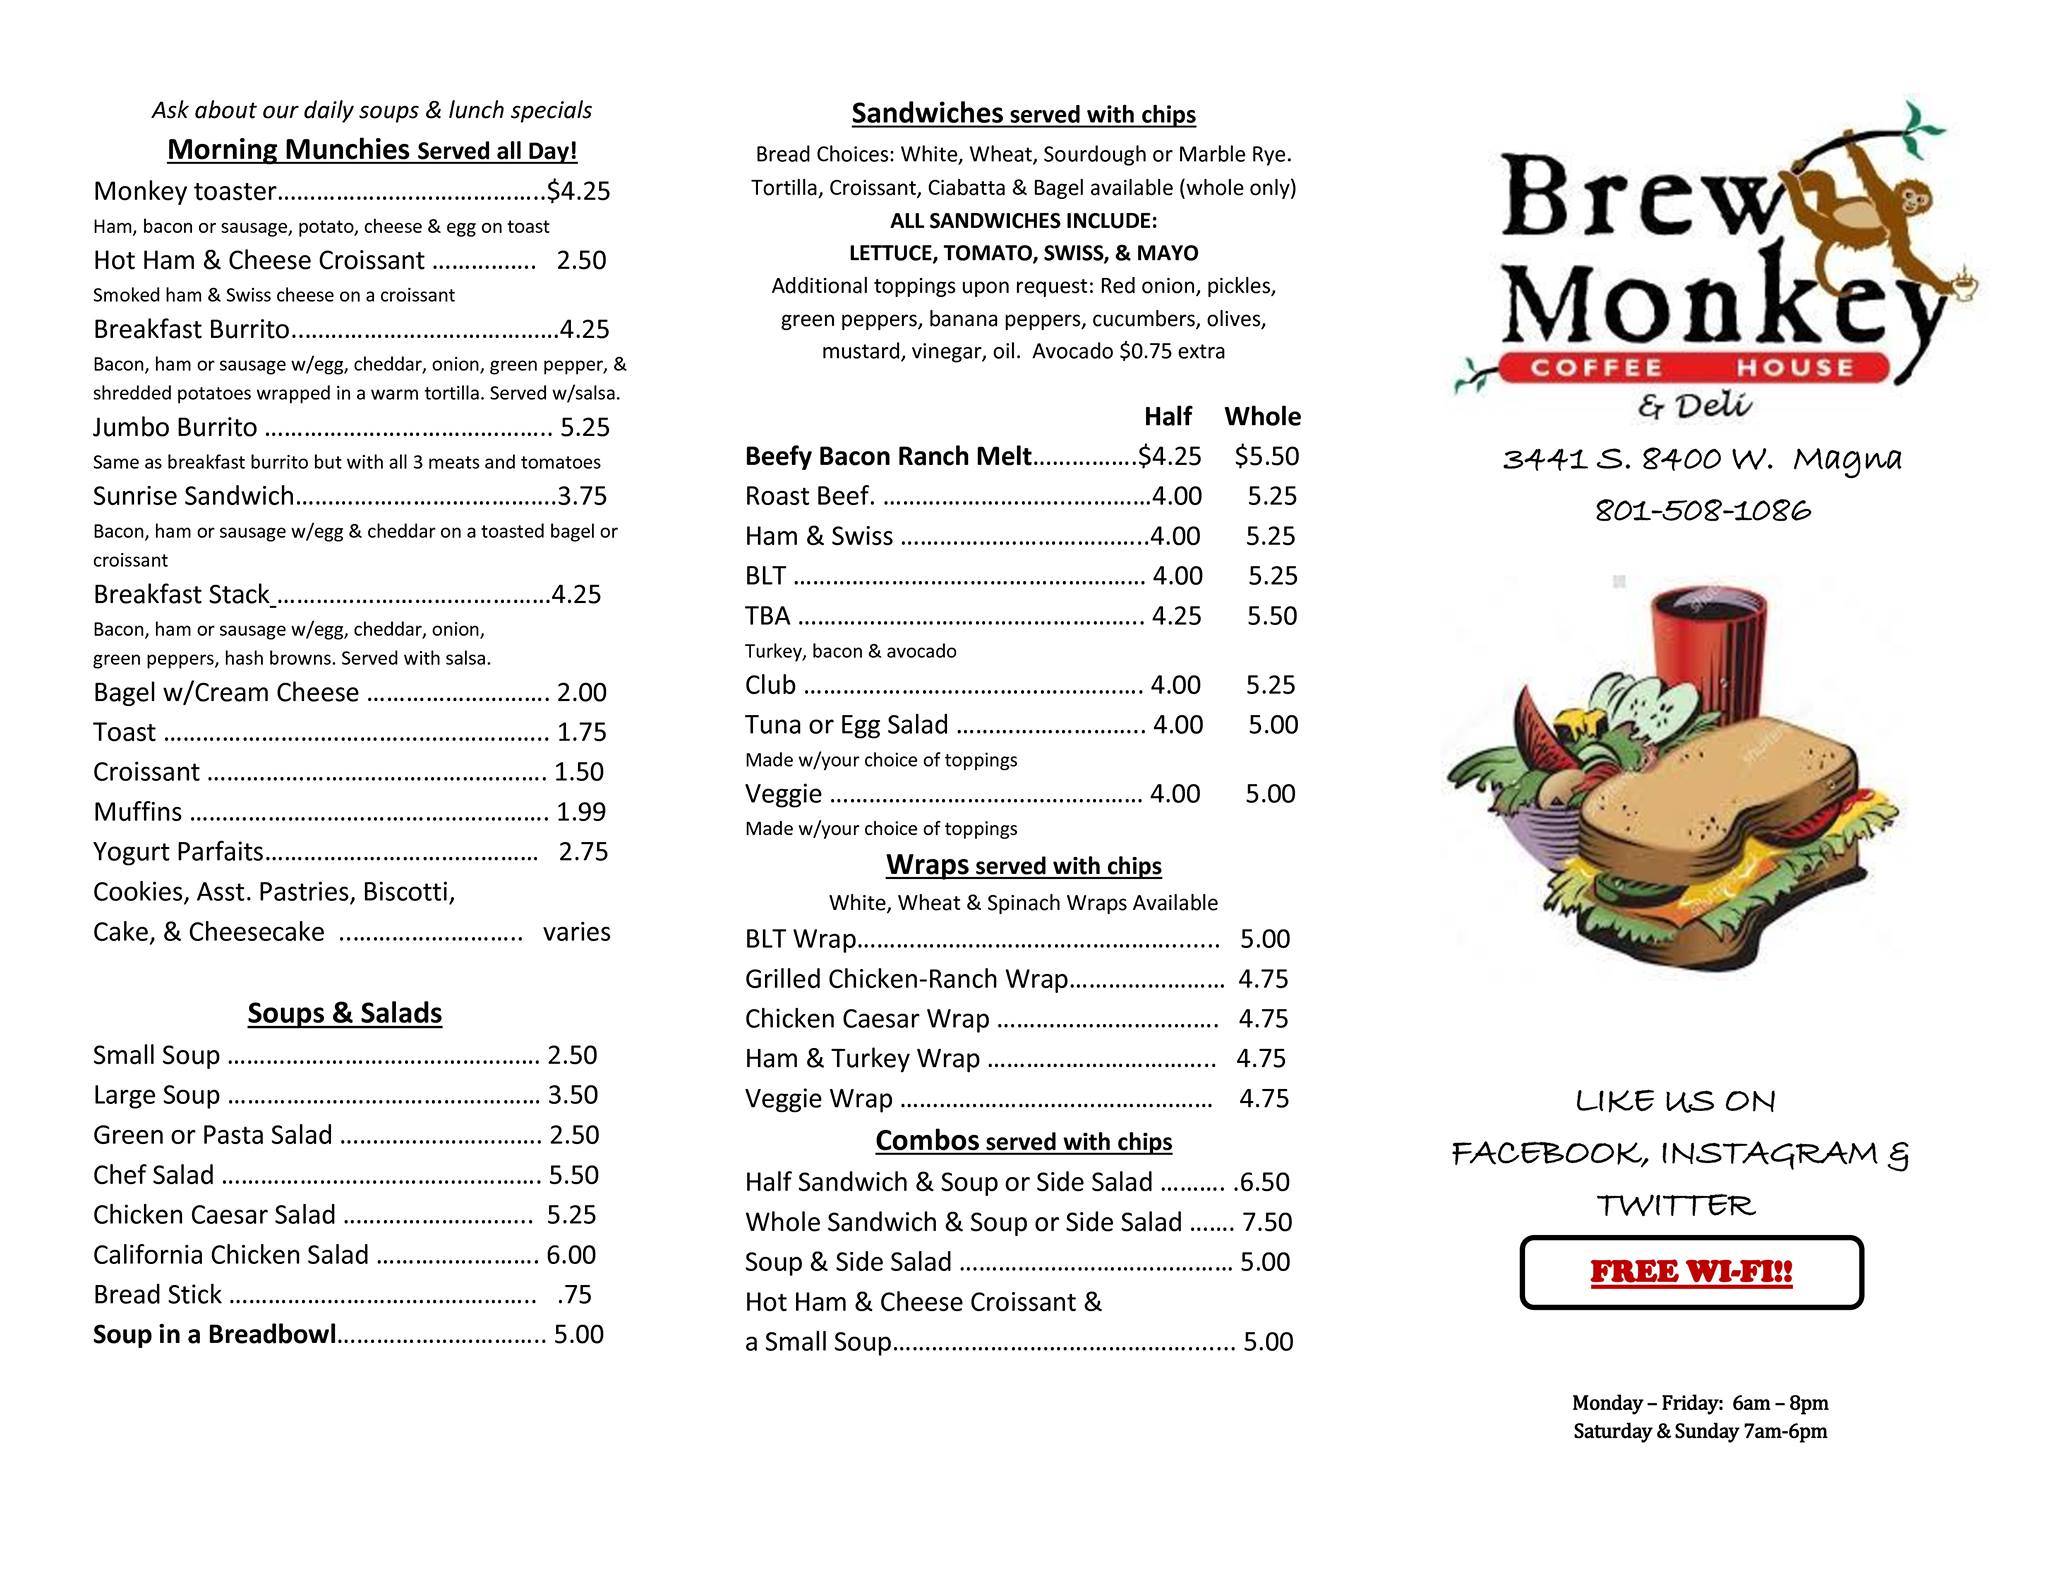 Menu at Brew Monkey Coffee House and Deli, Magna, S 8400 W